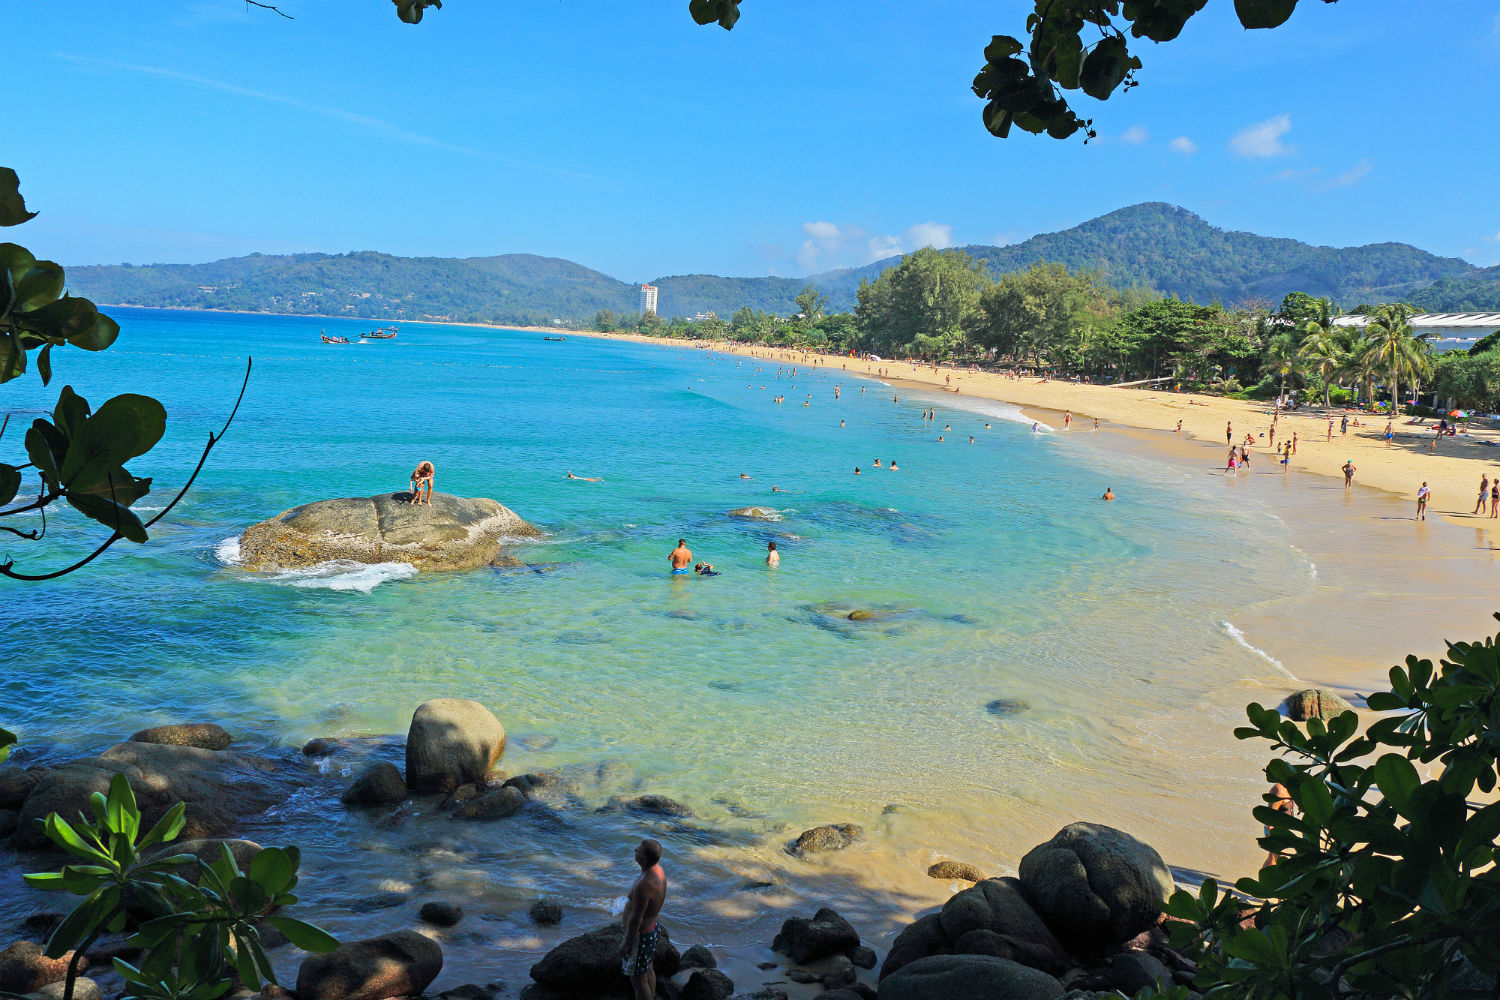 Top 10 Beaches in Thailand Rated by TripAdvisor in 2015